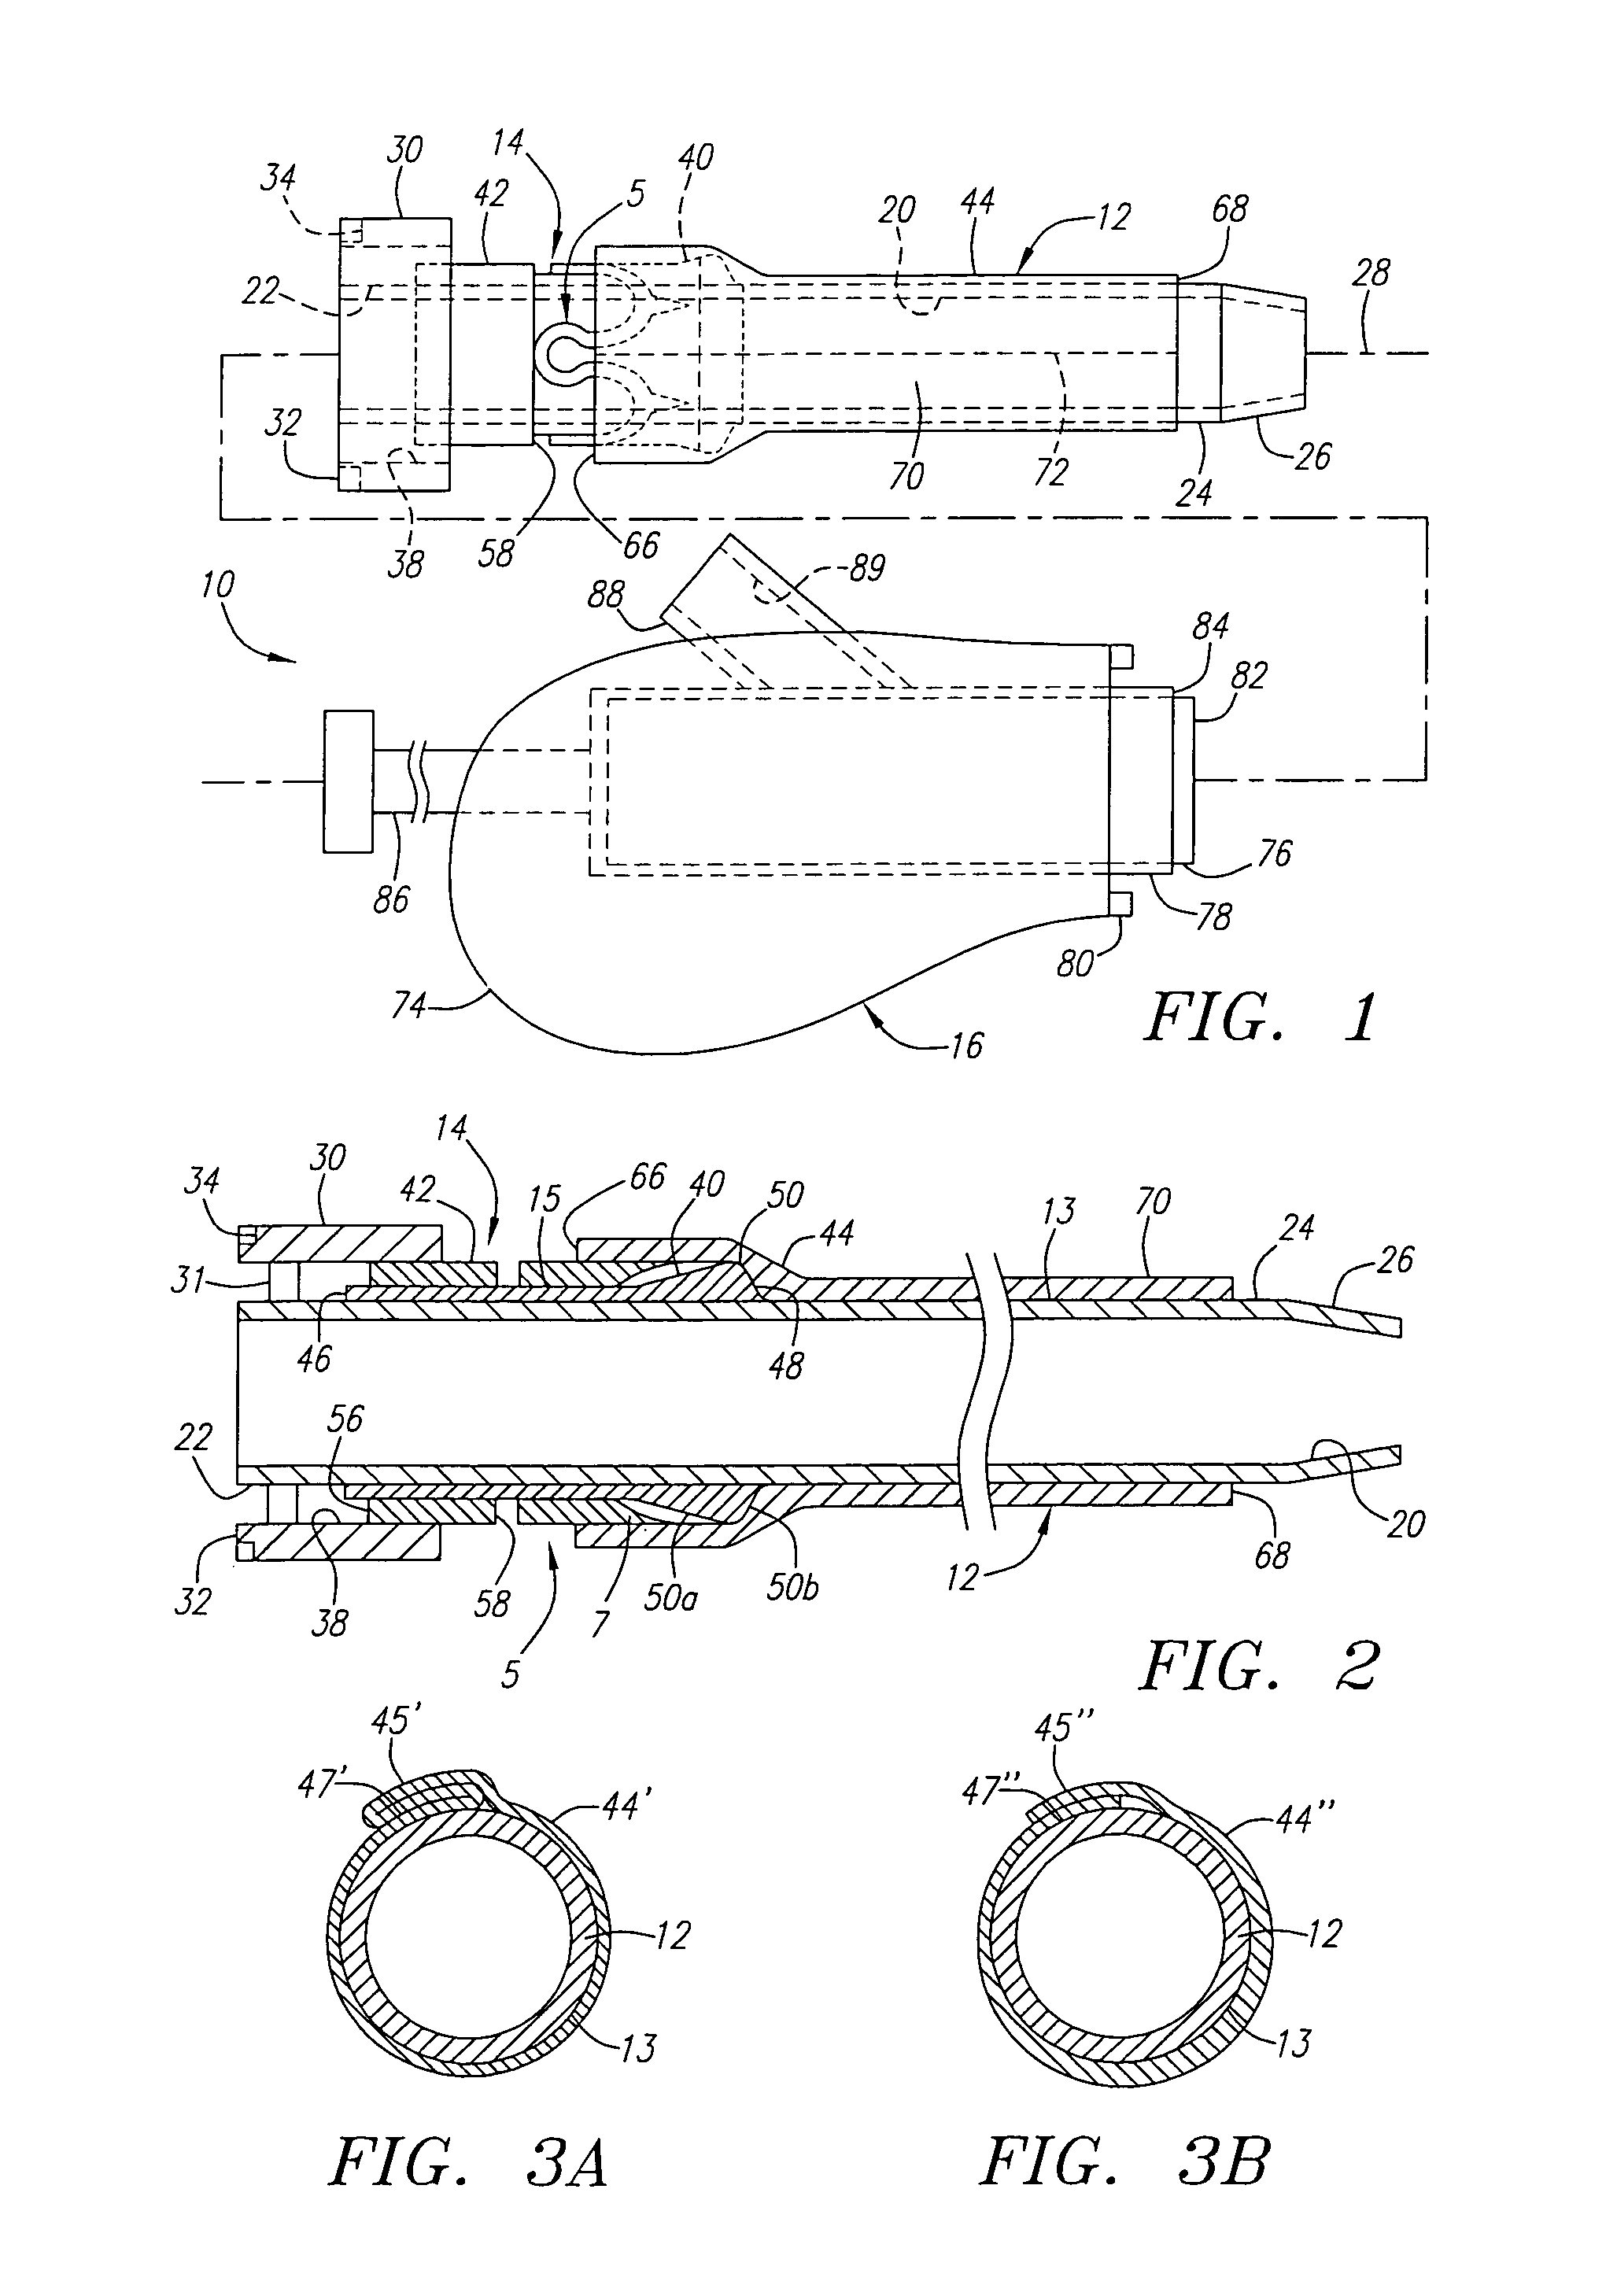 Plunger apparatus and methods for delivering a closure device